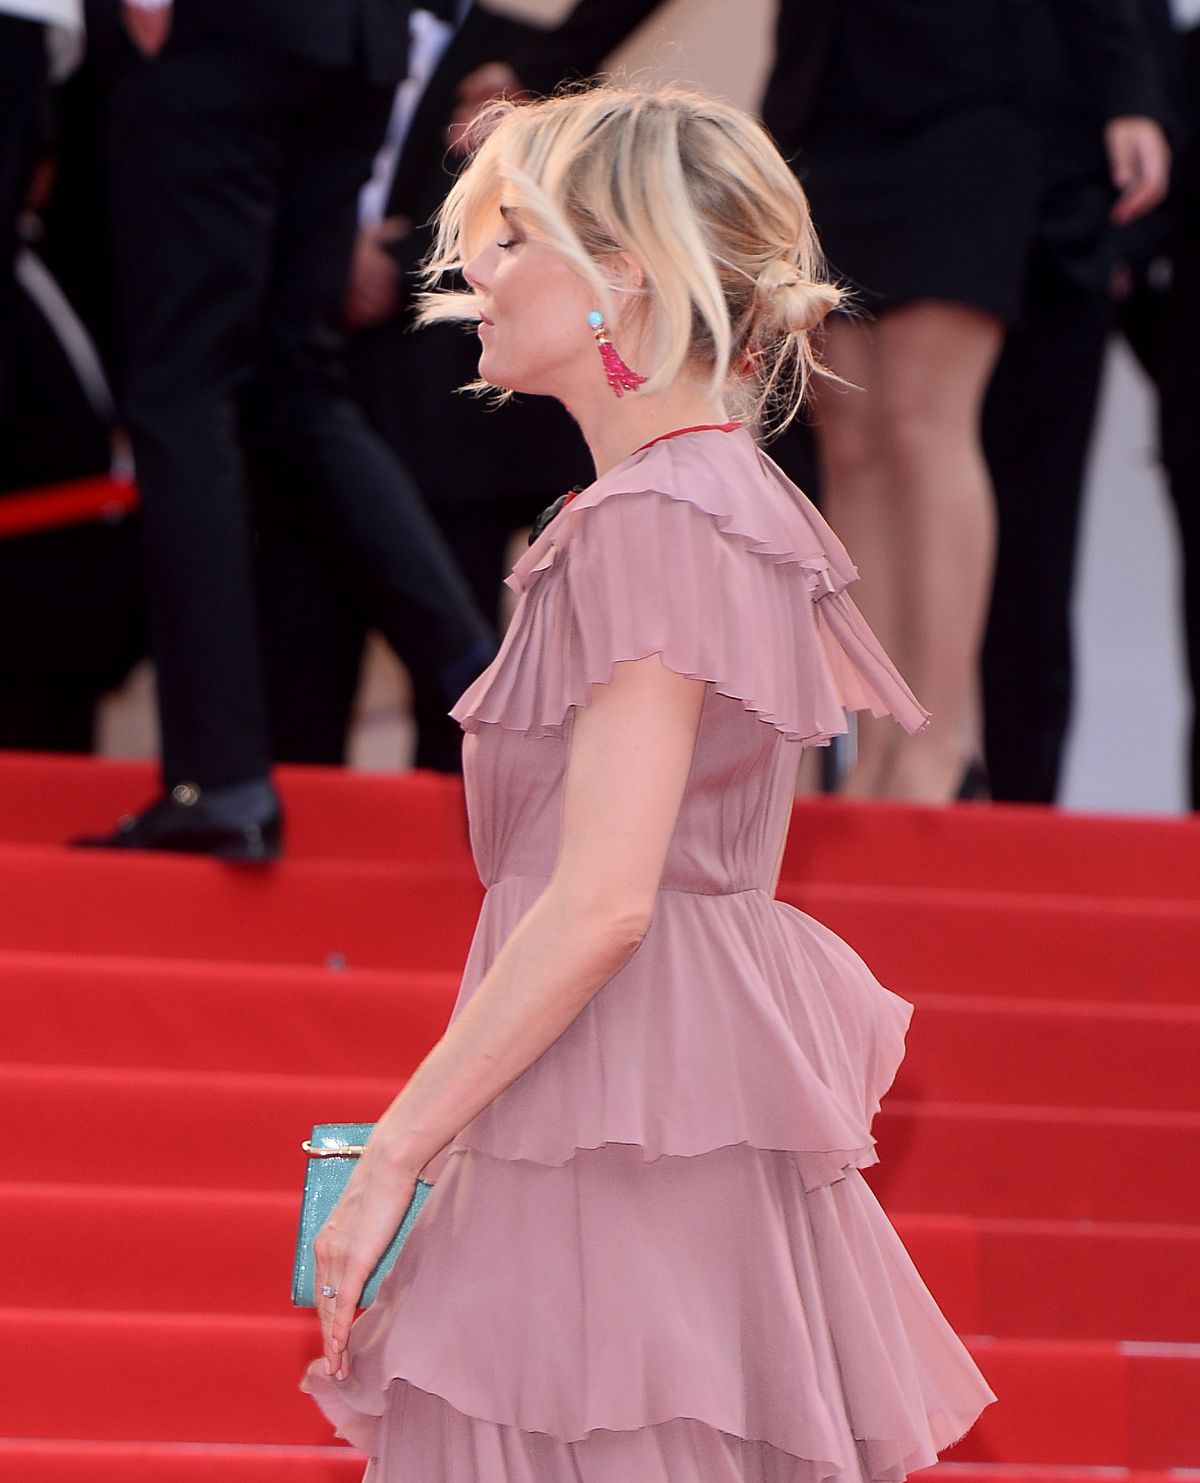 sienna-miller- in-gucci-at-macbeth-premiere-at-cannes-film-festival_